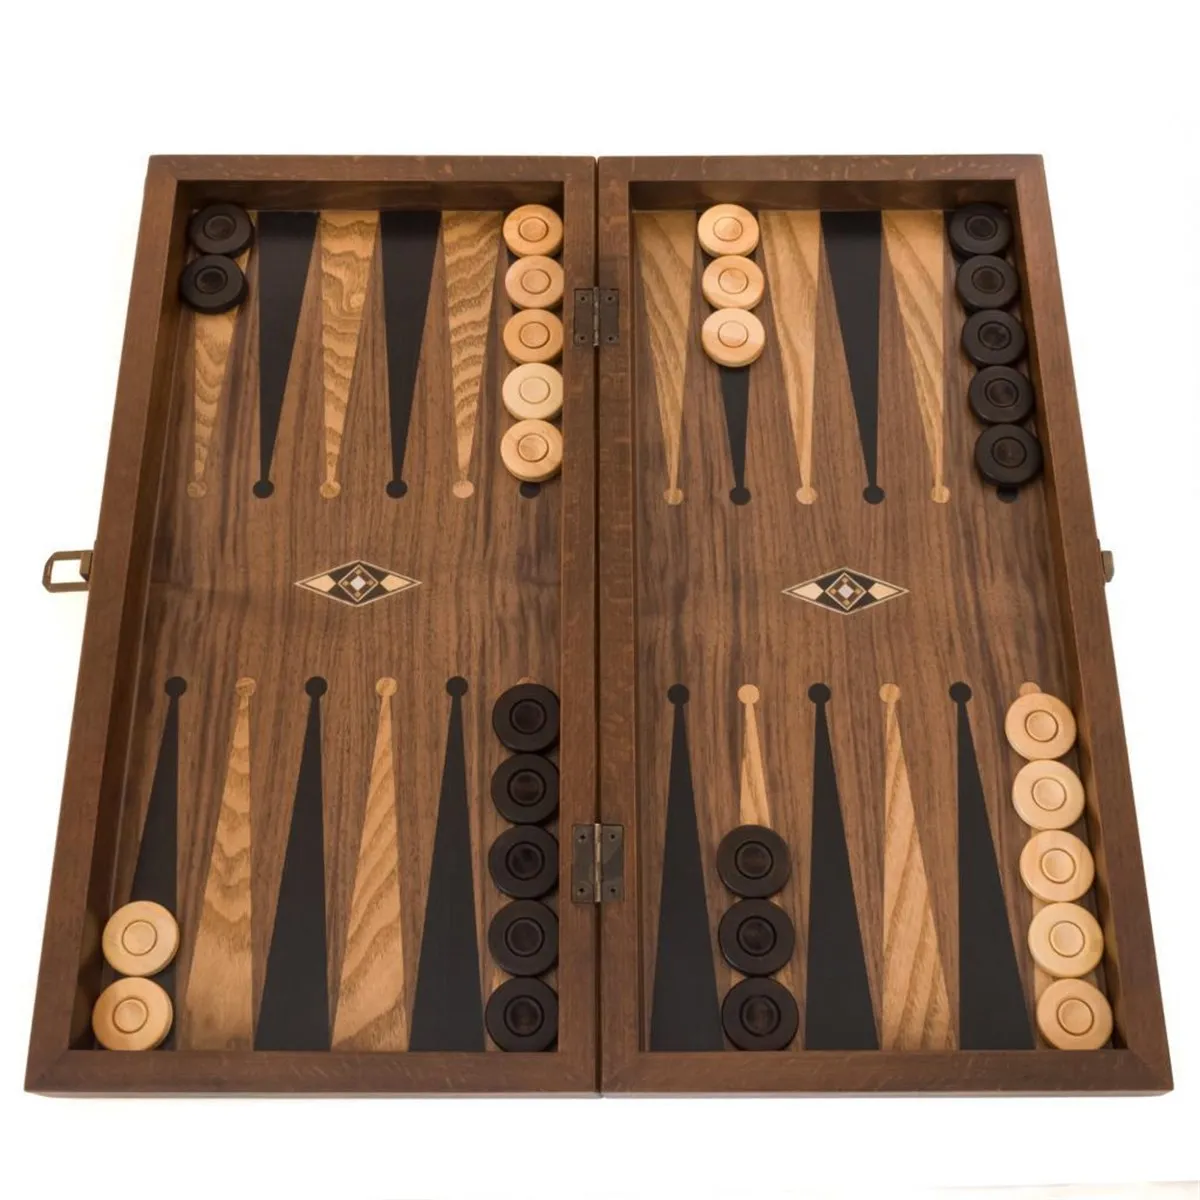 Luxury Big Size Natural Walnut Wood Coated Backgammon Board Game Set - With Chips Dice - With Boxwood Stamps Checkers Stones small hand woven wood chips with handle basket rattan storage baskets picnic bread fruit basket storage hanging baskets